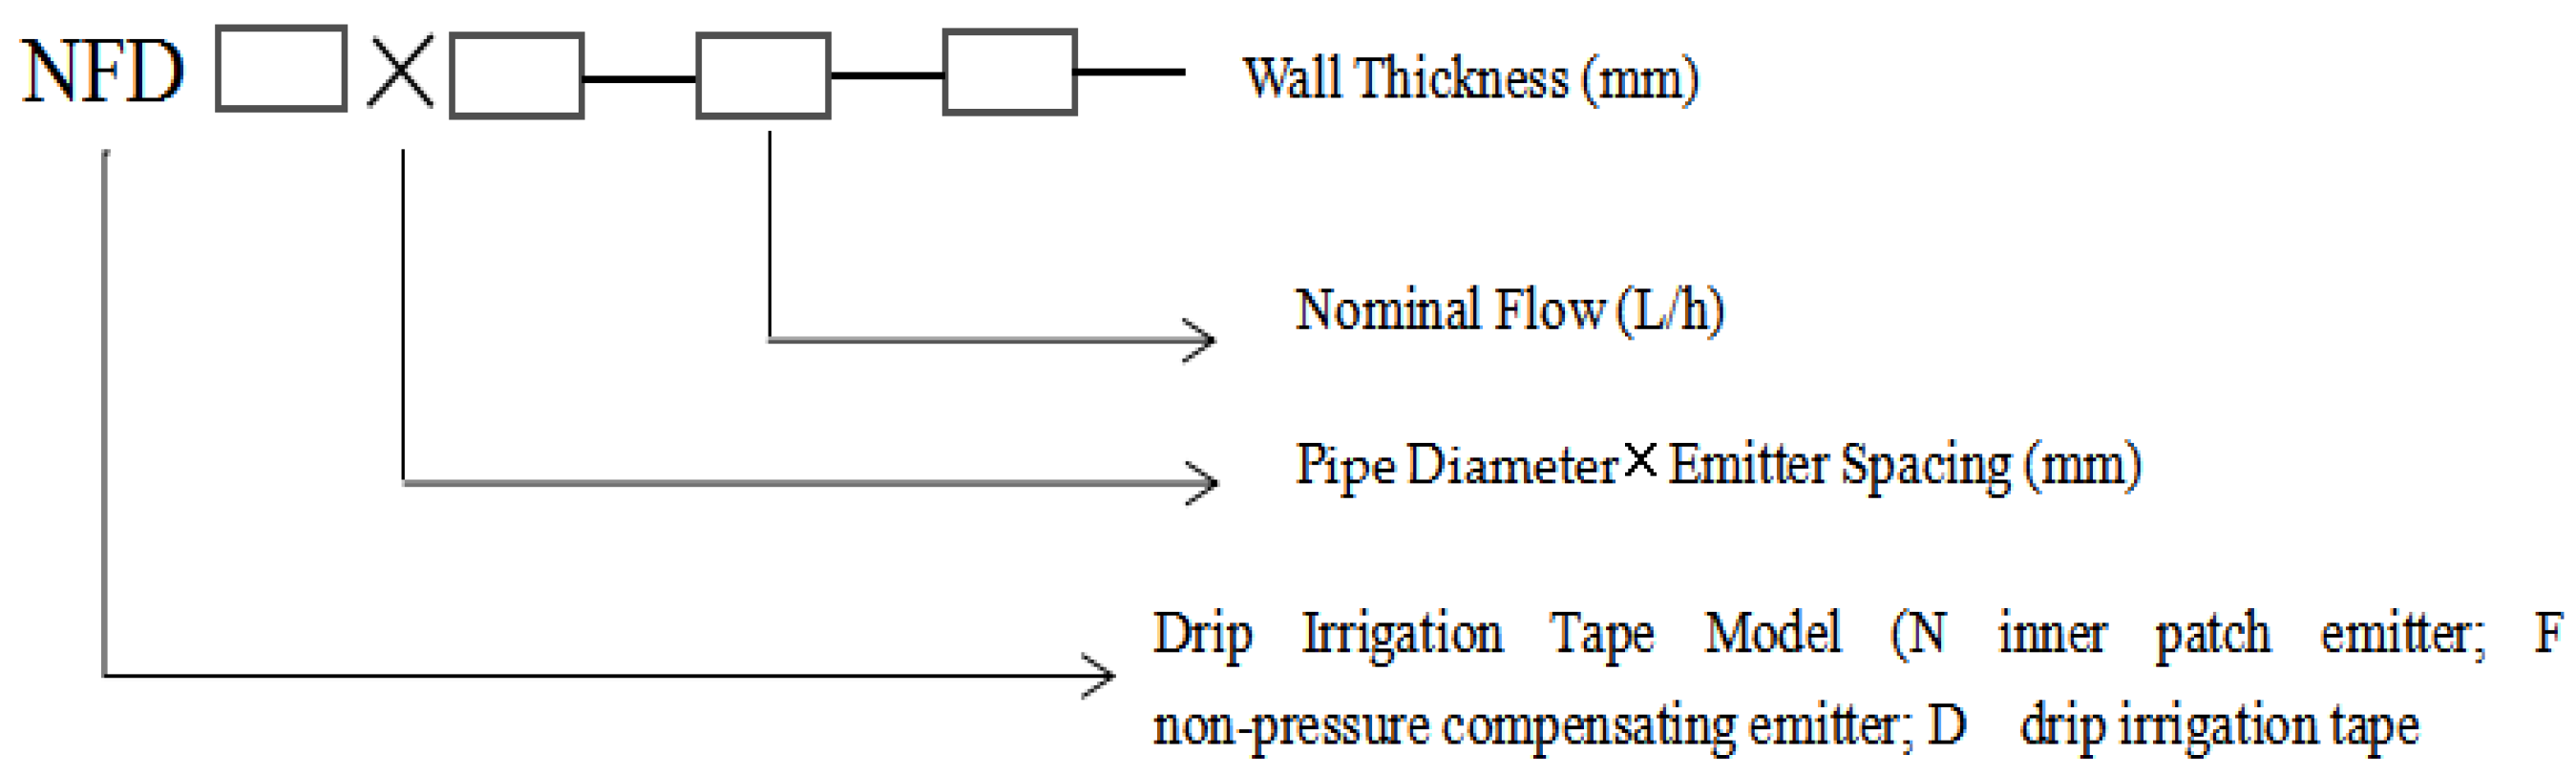 Water | Free Full-Text | Analysis of Flow Channel Structure Parameter and  Optimization Study on Tooth Spacing of Drip Irrigation Tape